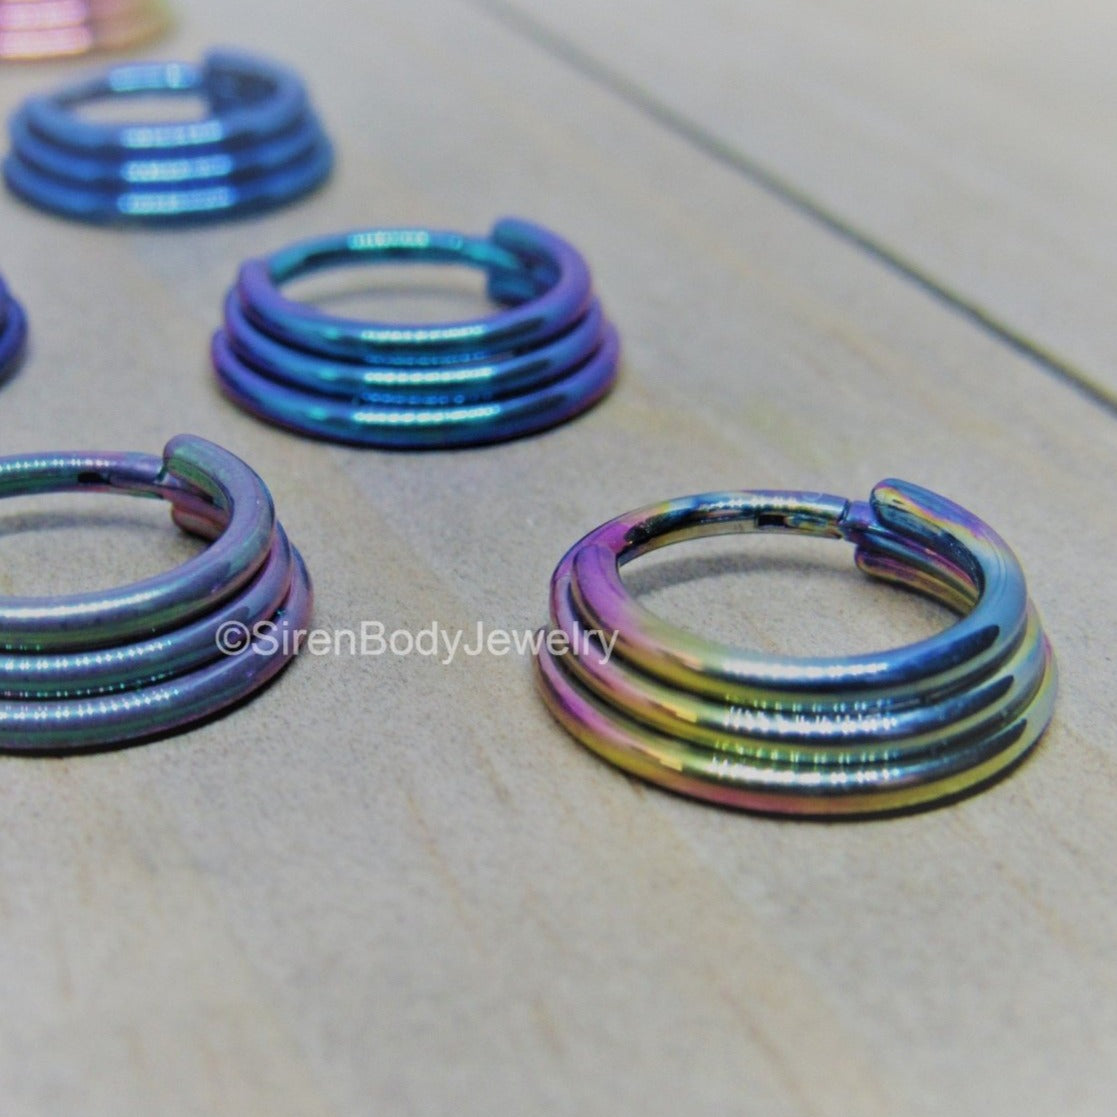 Titanium hinged stacked septum ring 16g daith stack ring clicker triple cartilage hoop 3/8" - SirenBodyJewelry